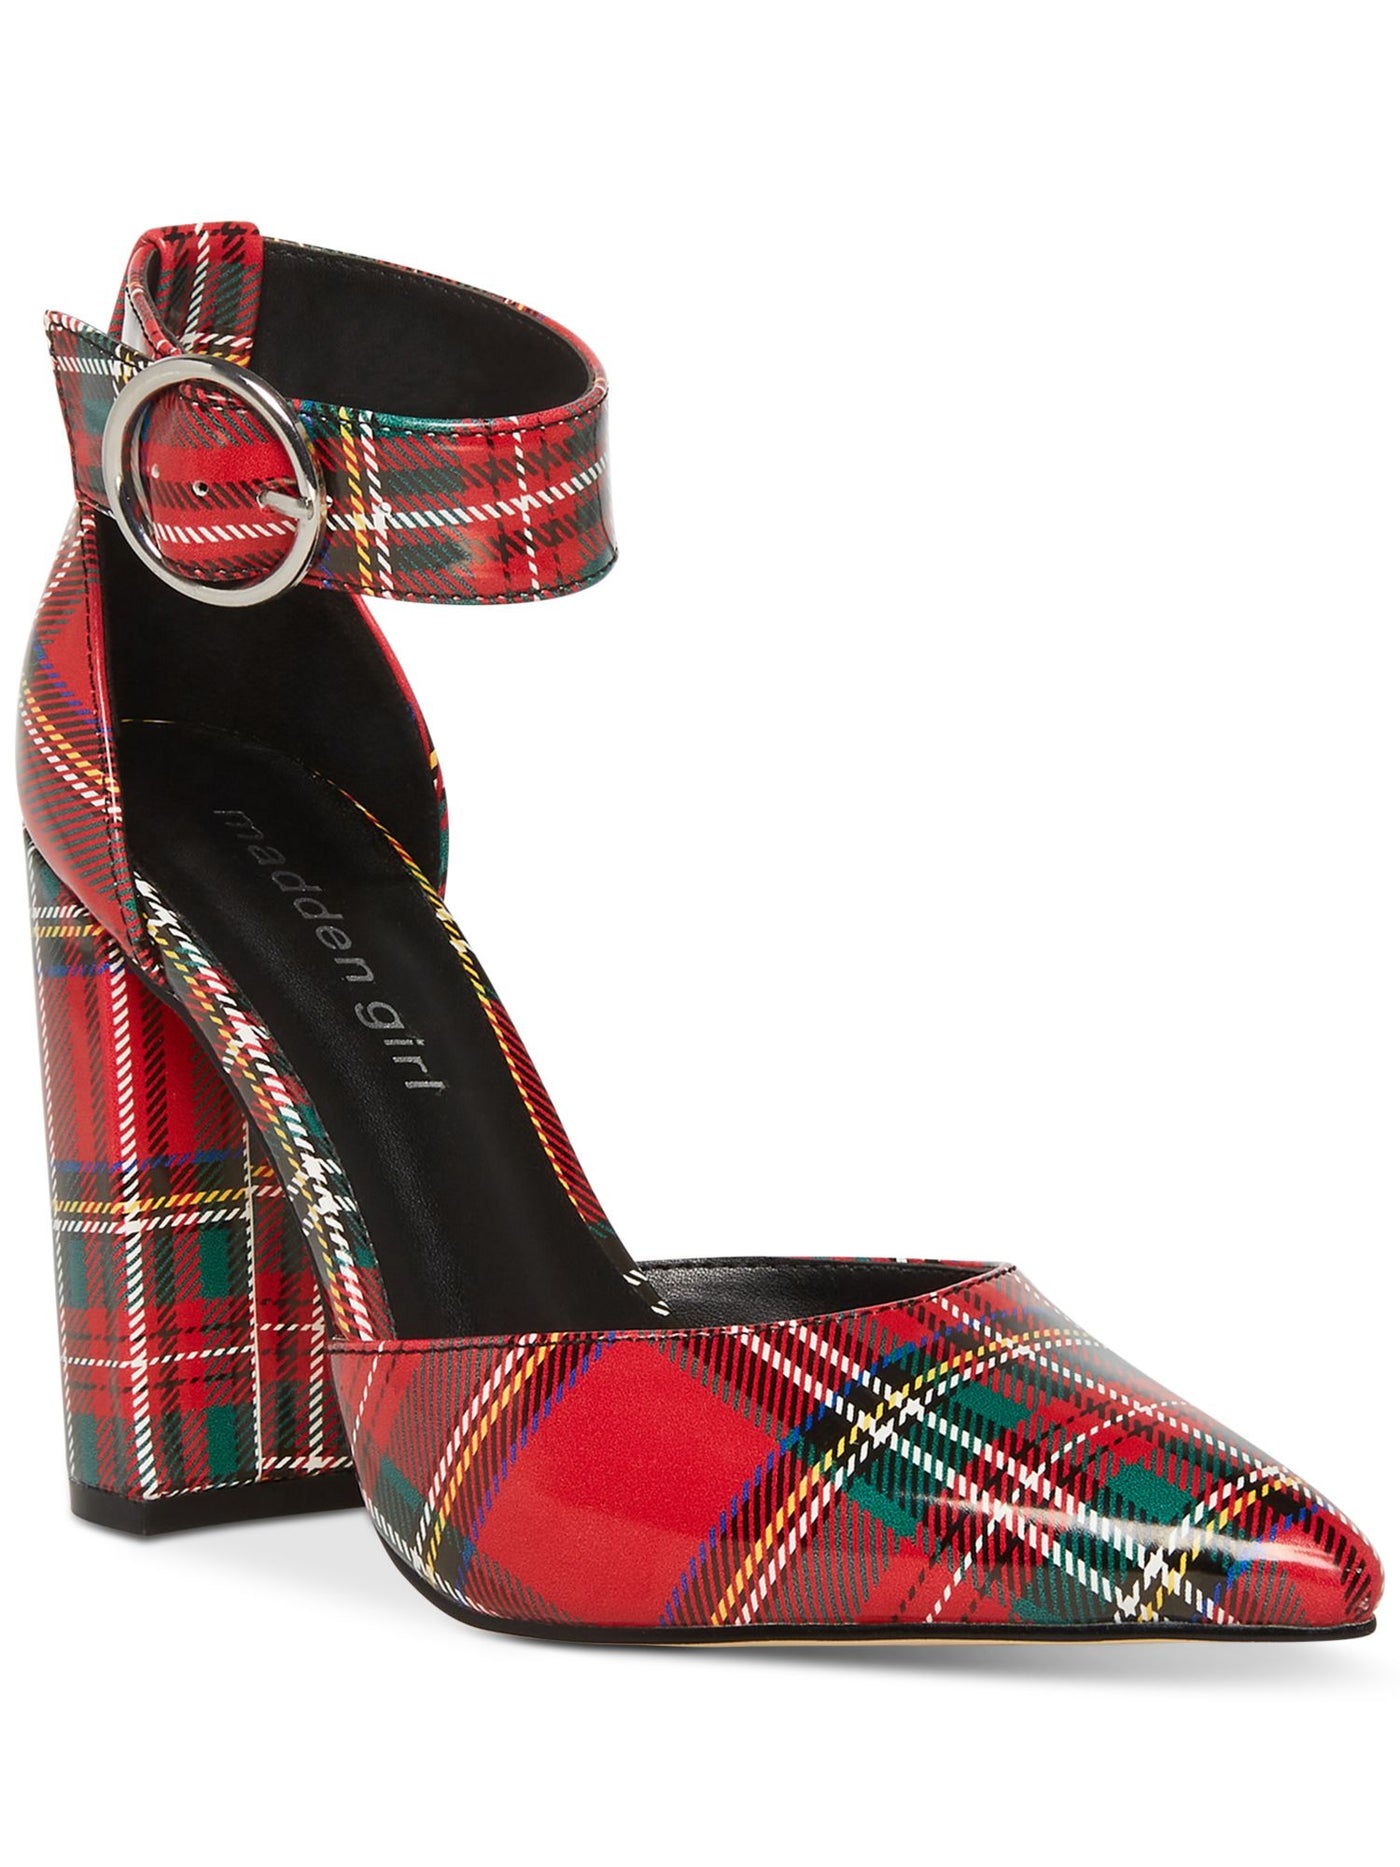 MADDEN GIRL Womens Red Plaid Padded Goring Adjustable Saxon Pointed Toe Block Heel Buckle Dress Pumps Shoes 6 M